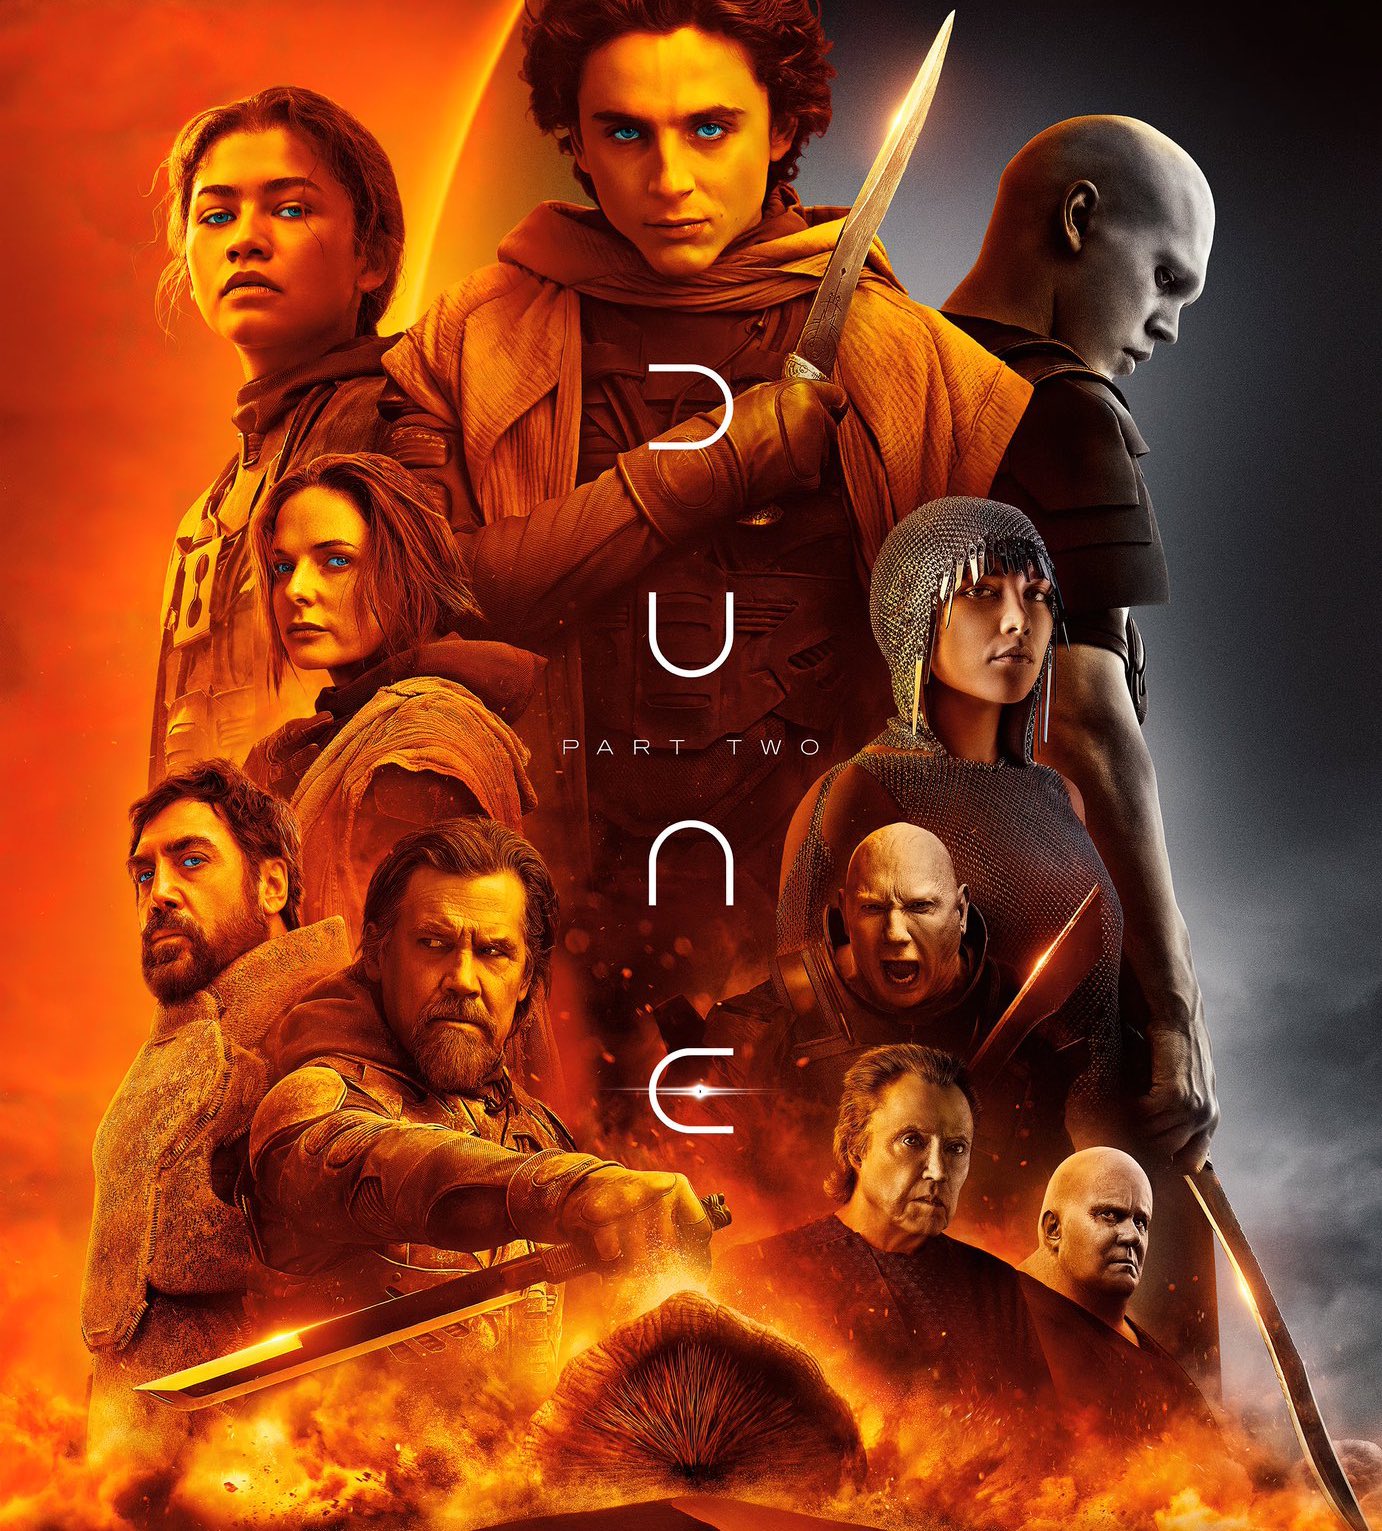 Dune Part Two Poster